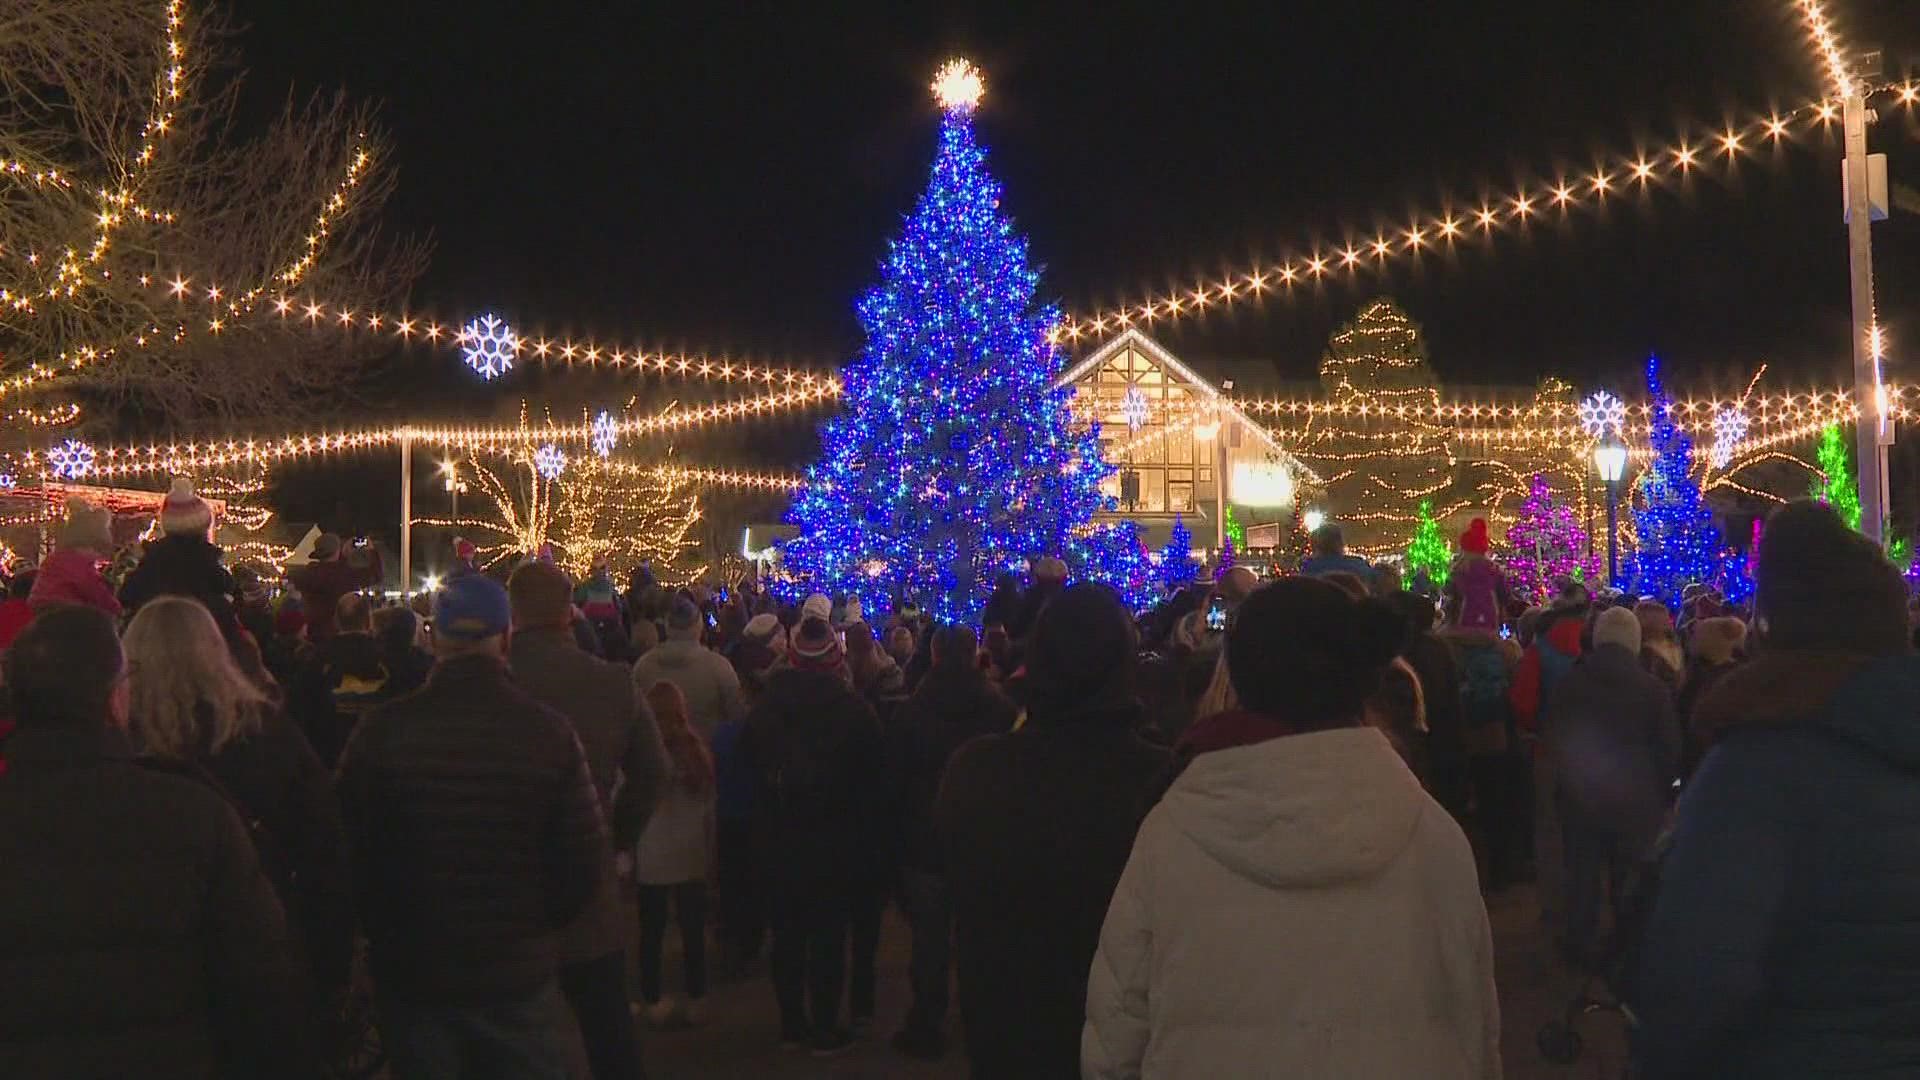 Hundreds of people gathered to watch L.L. Bean's annual tree lighting ceremony to kick-off the holiday season.